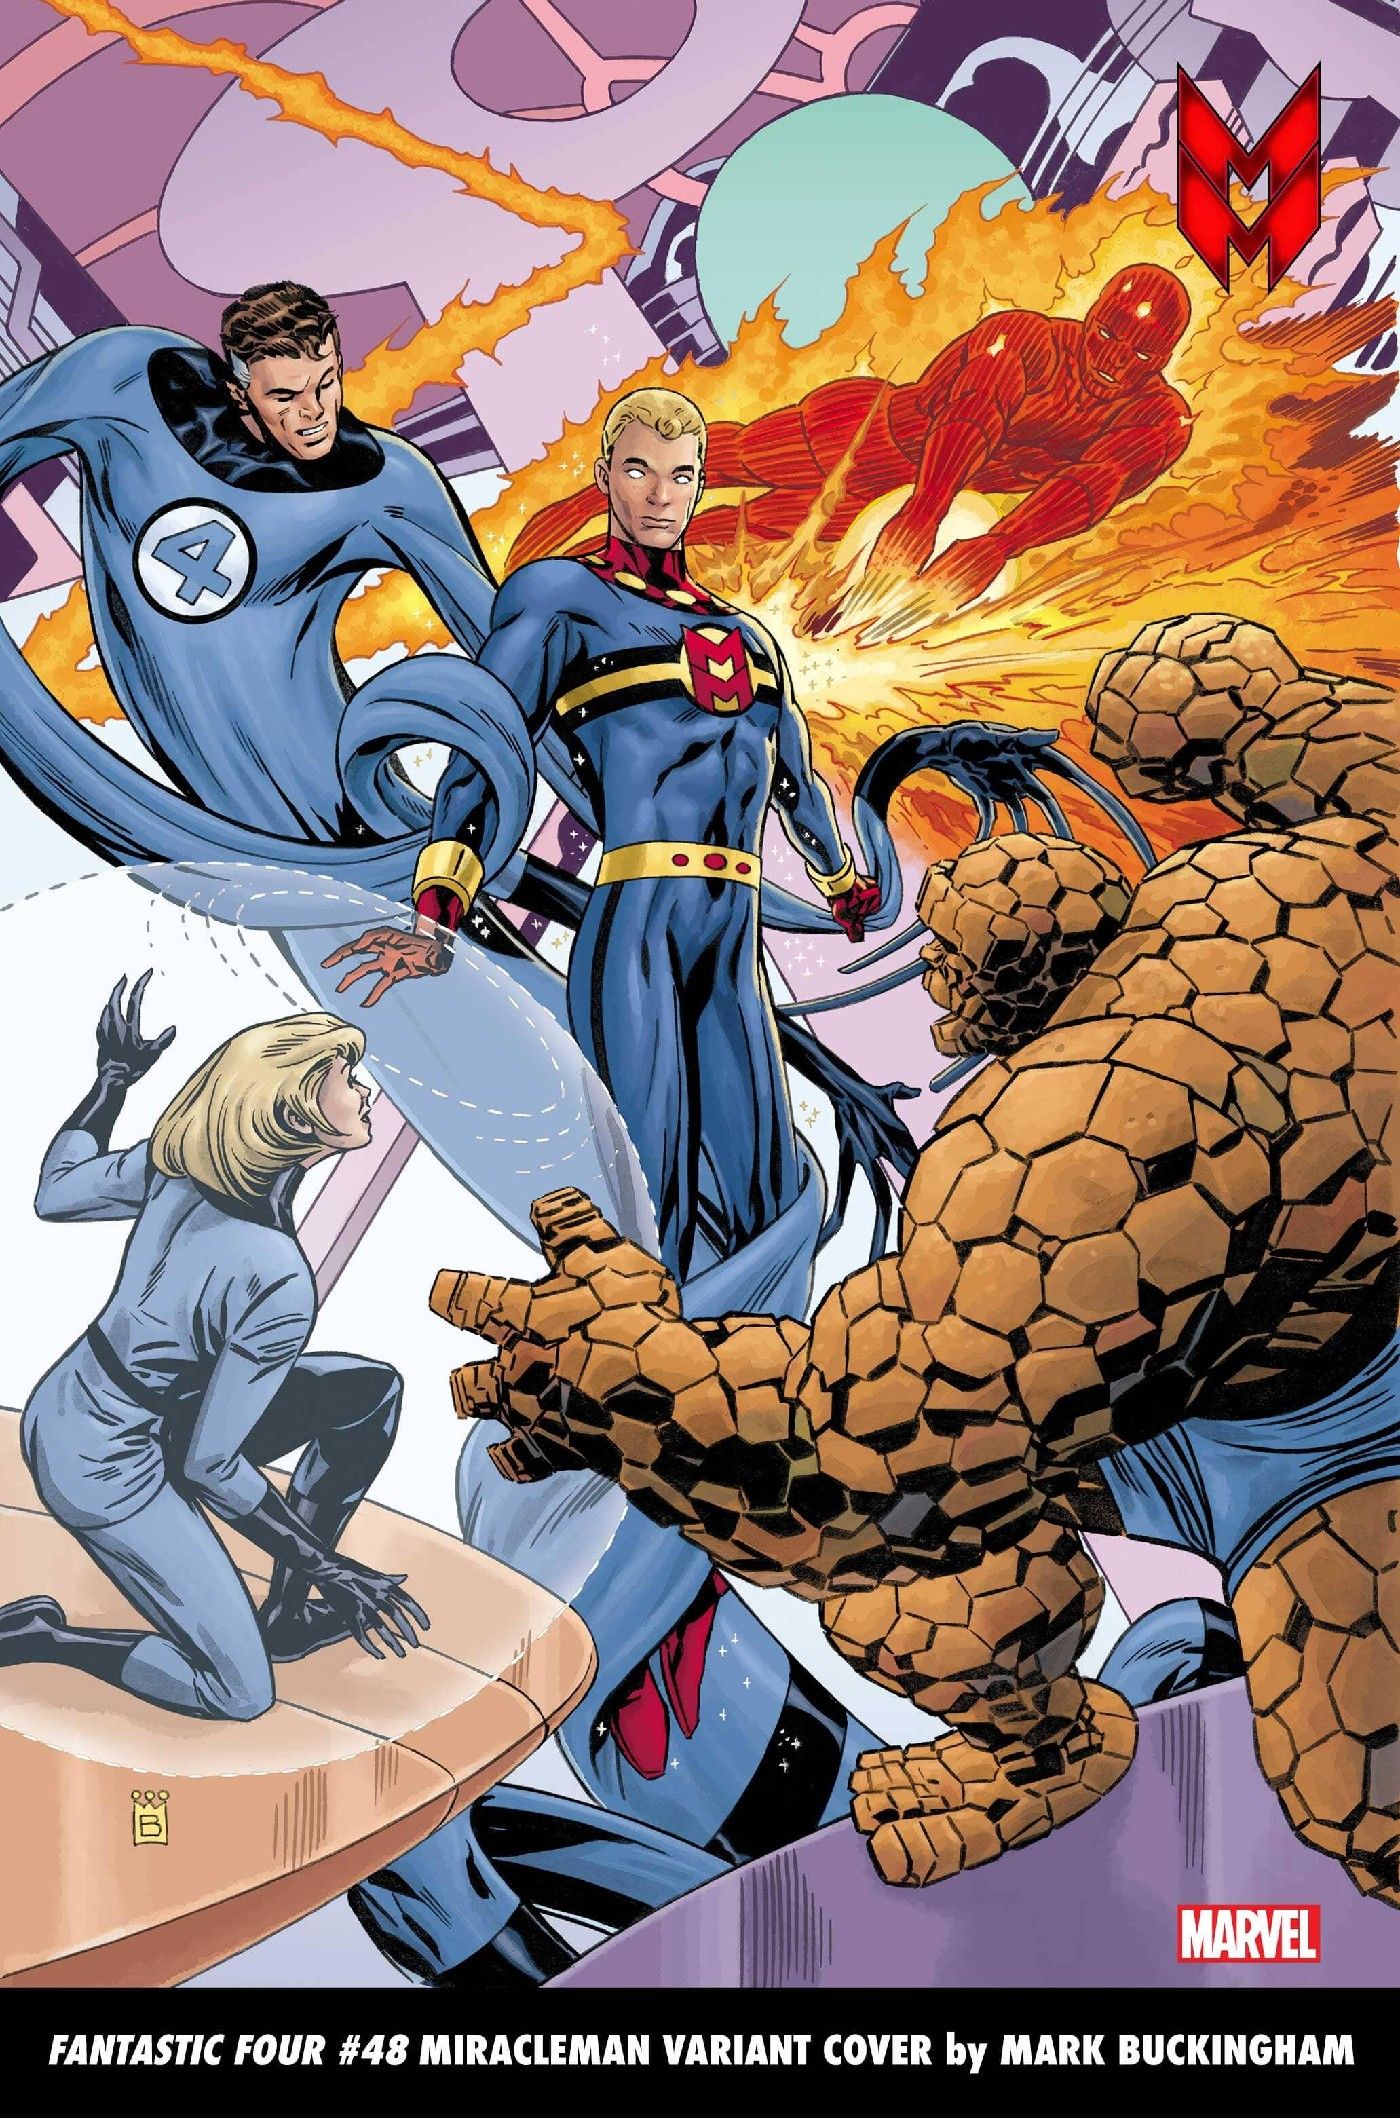 FANTASTIC FOUR 48 MIRACLEMAN VARIANT COVER by MARK BUCKINGHAM